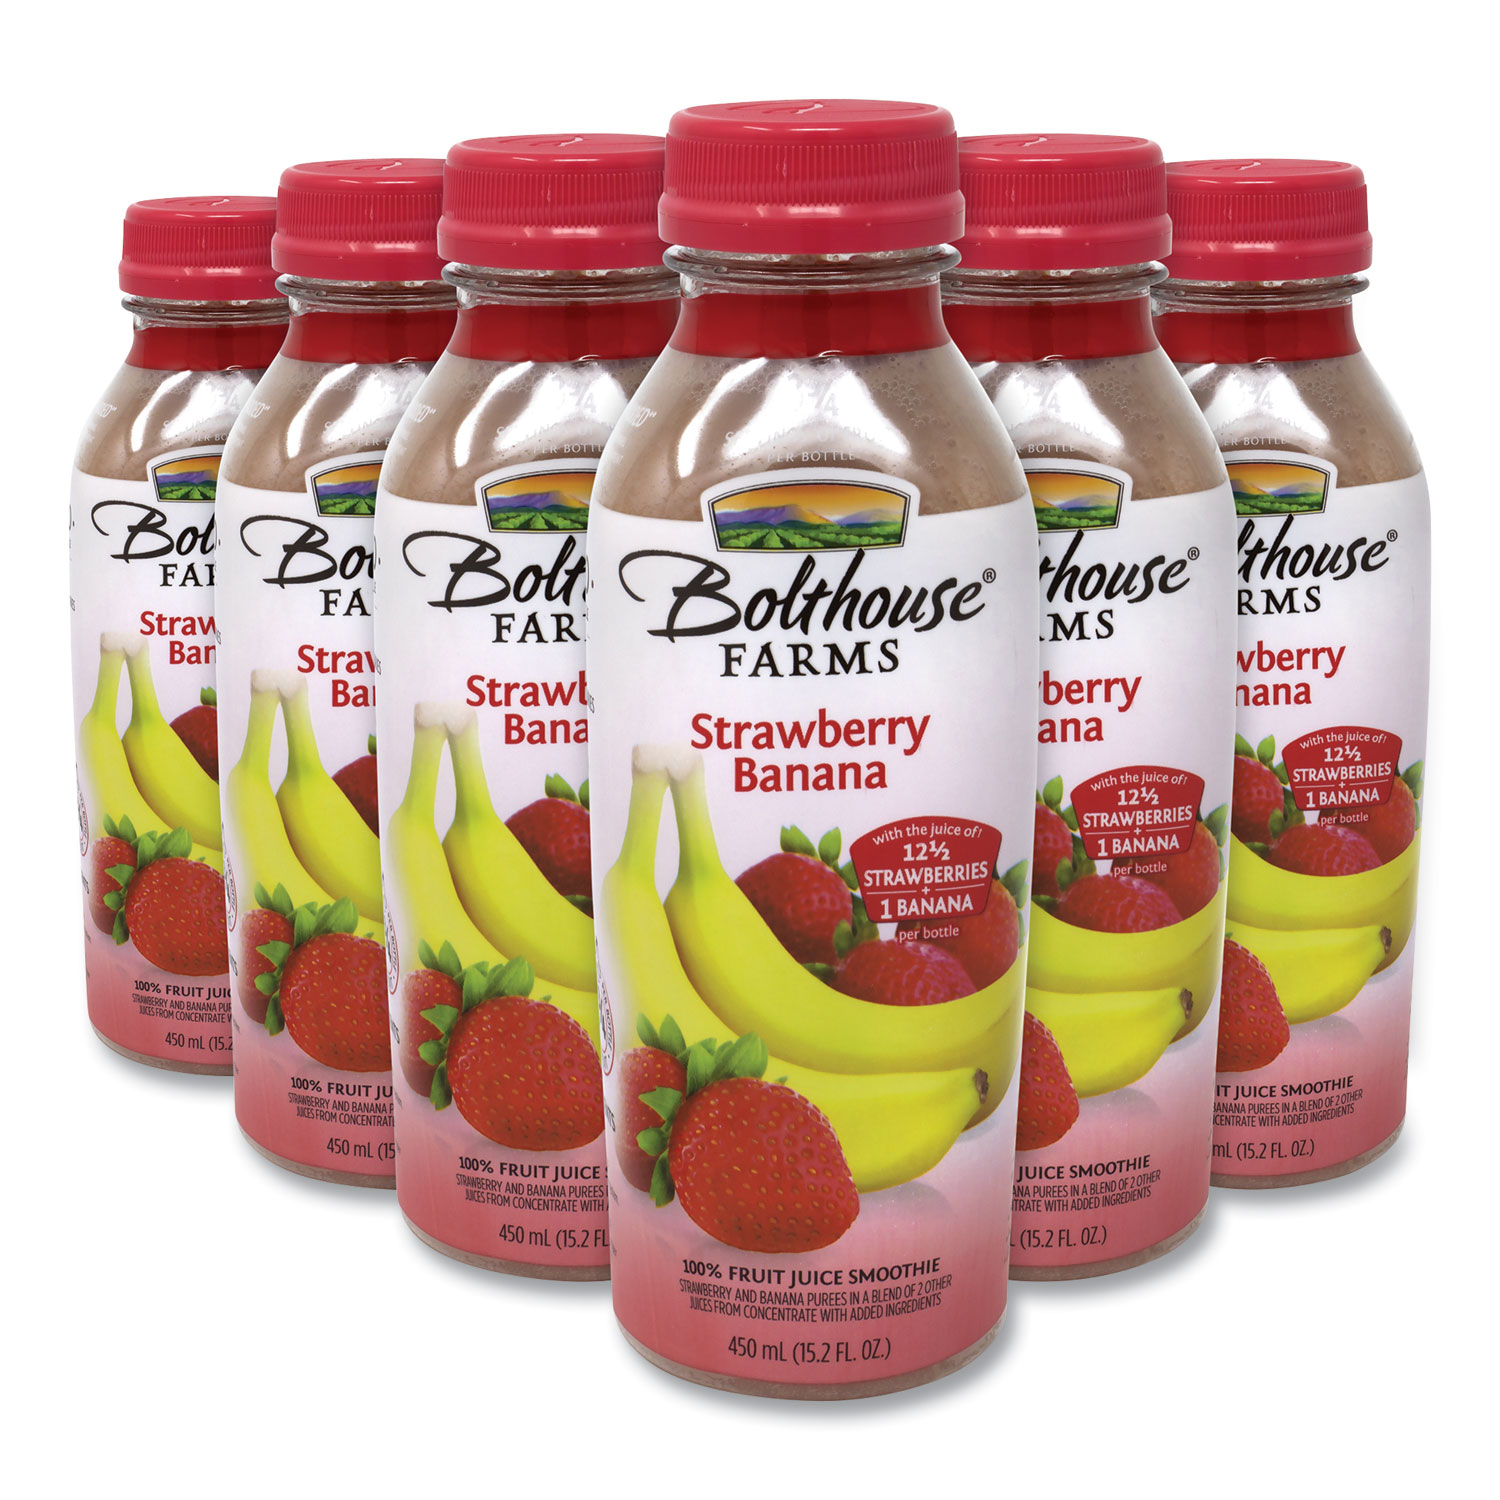  Bolthouse Farms SB4BF6 100% Fruit Juice Smoothie, Strawberry Banana, 15.2 oz Bottle, 6/Pack, Free Delivery in 1-4 Business Days (GRR90200458) 